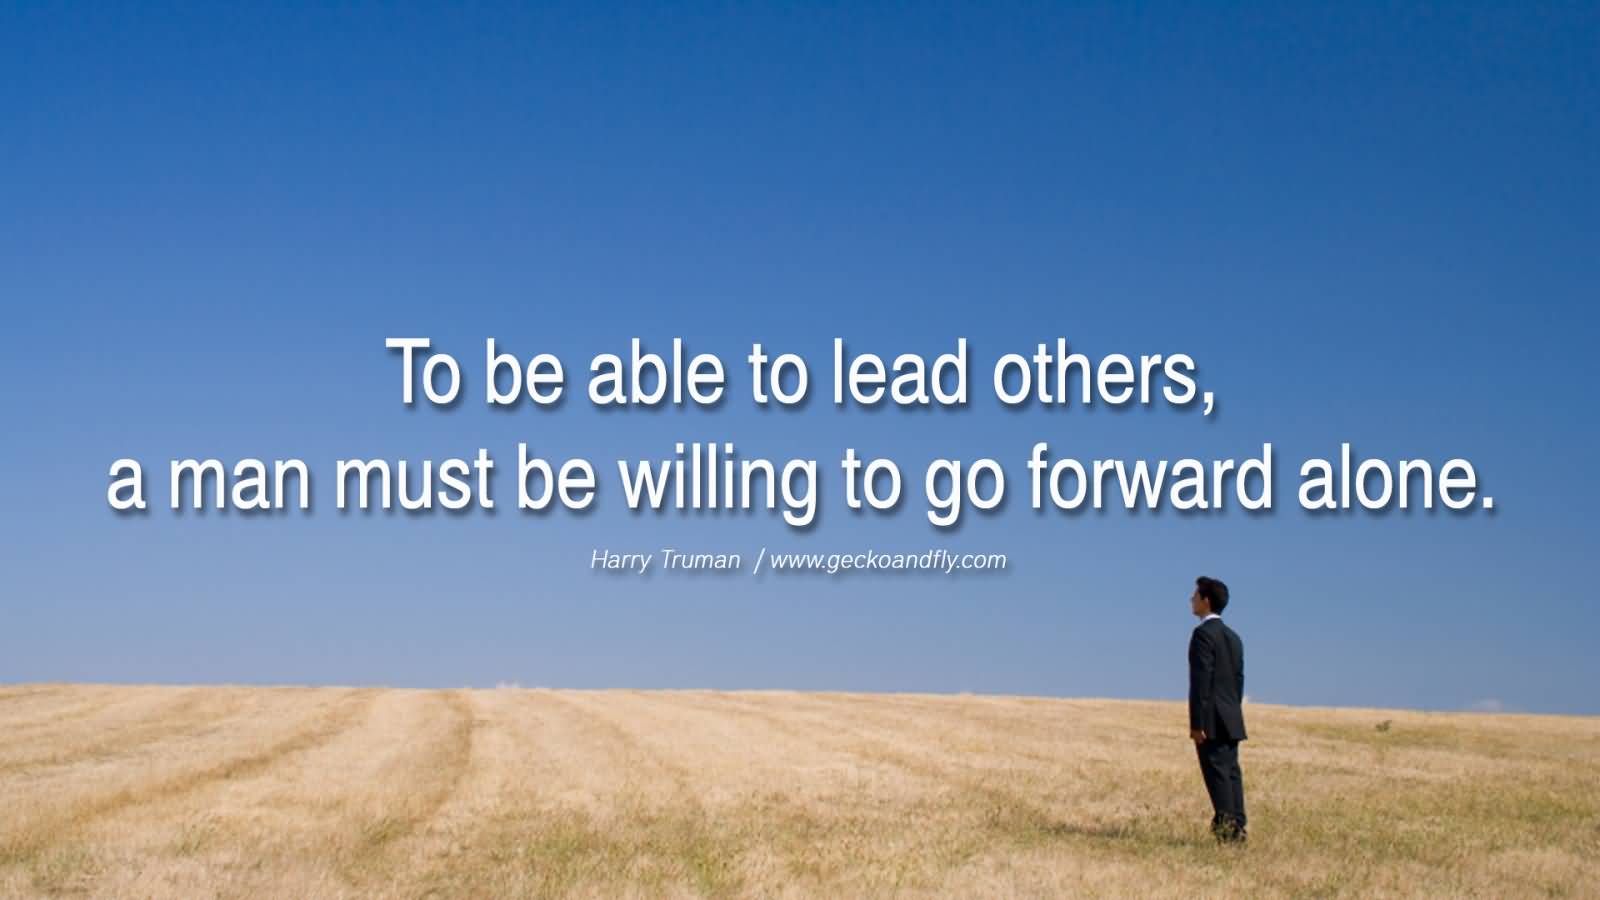 To be able to lead others, a man must be willing to go forward alone. Harry Truman